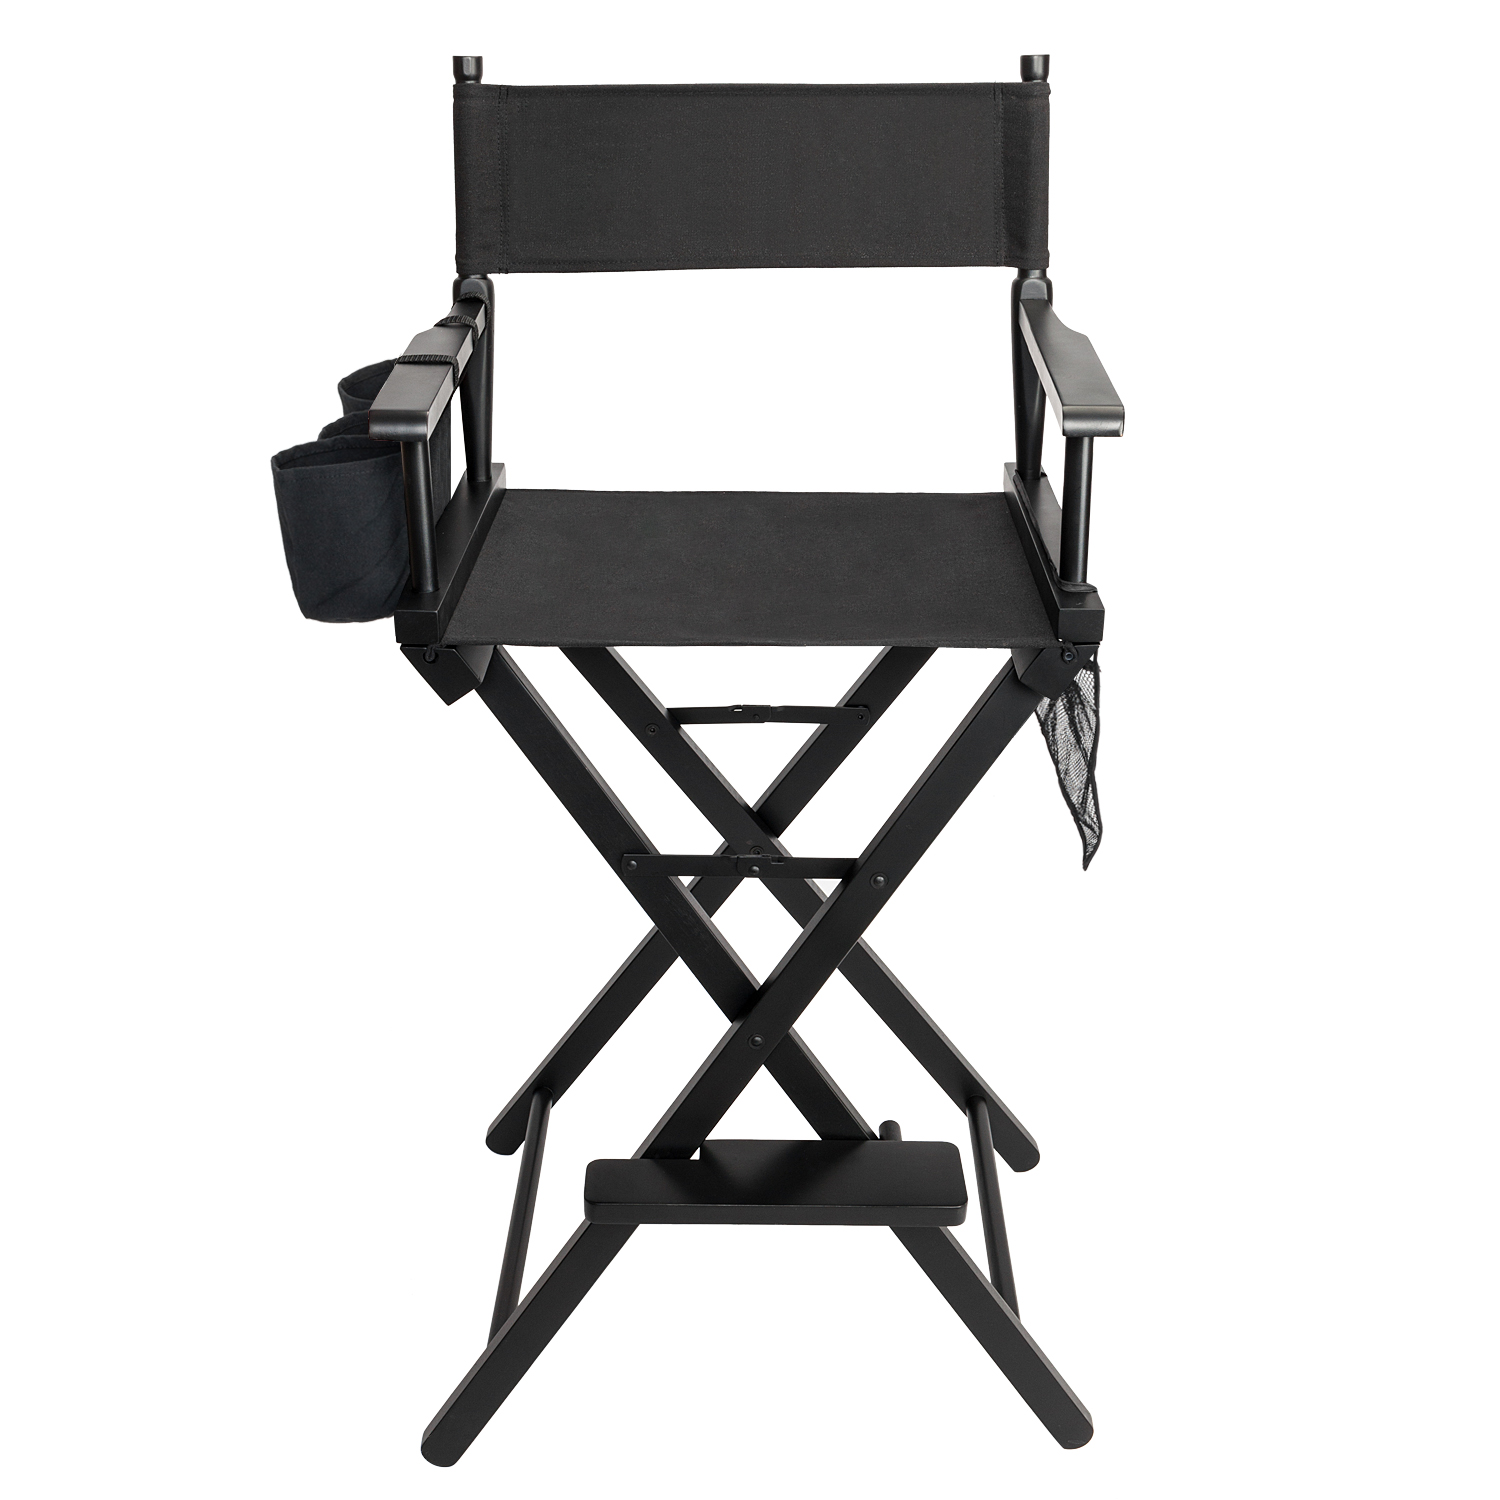 UBesGoo Hot Directors Chair 30" Canvas Tall Seat Black Wood Makeup Folding Chair - image 5 of 10